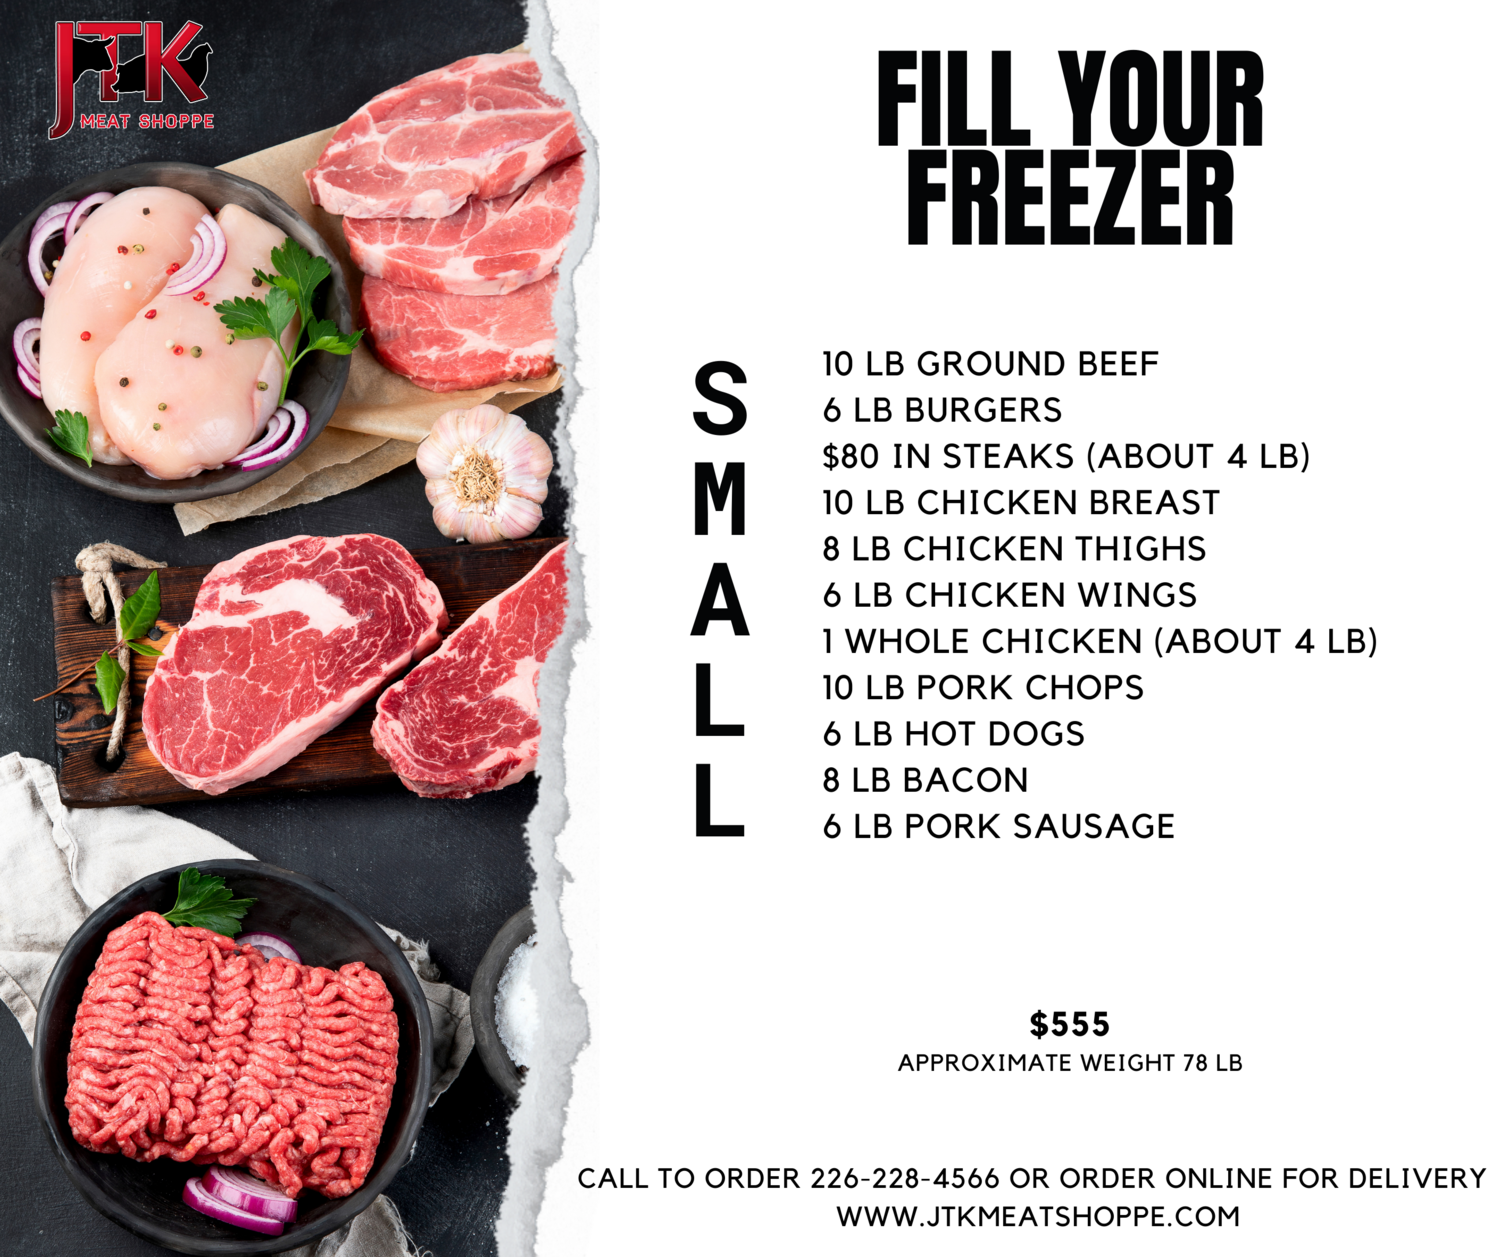 FILL YOUR FREEZER - SMALL